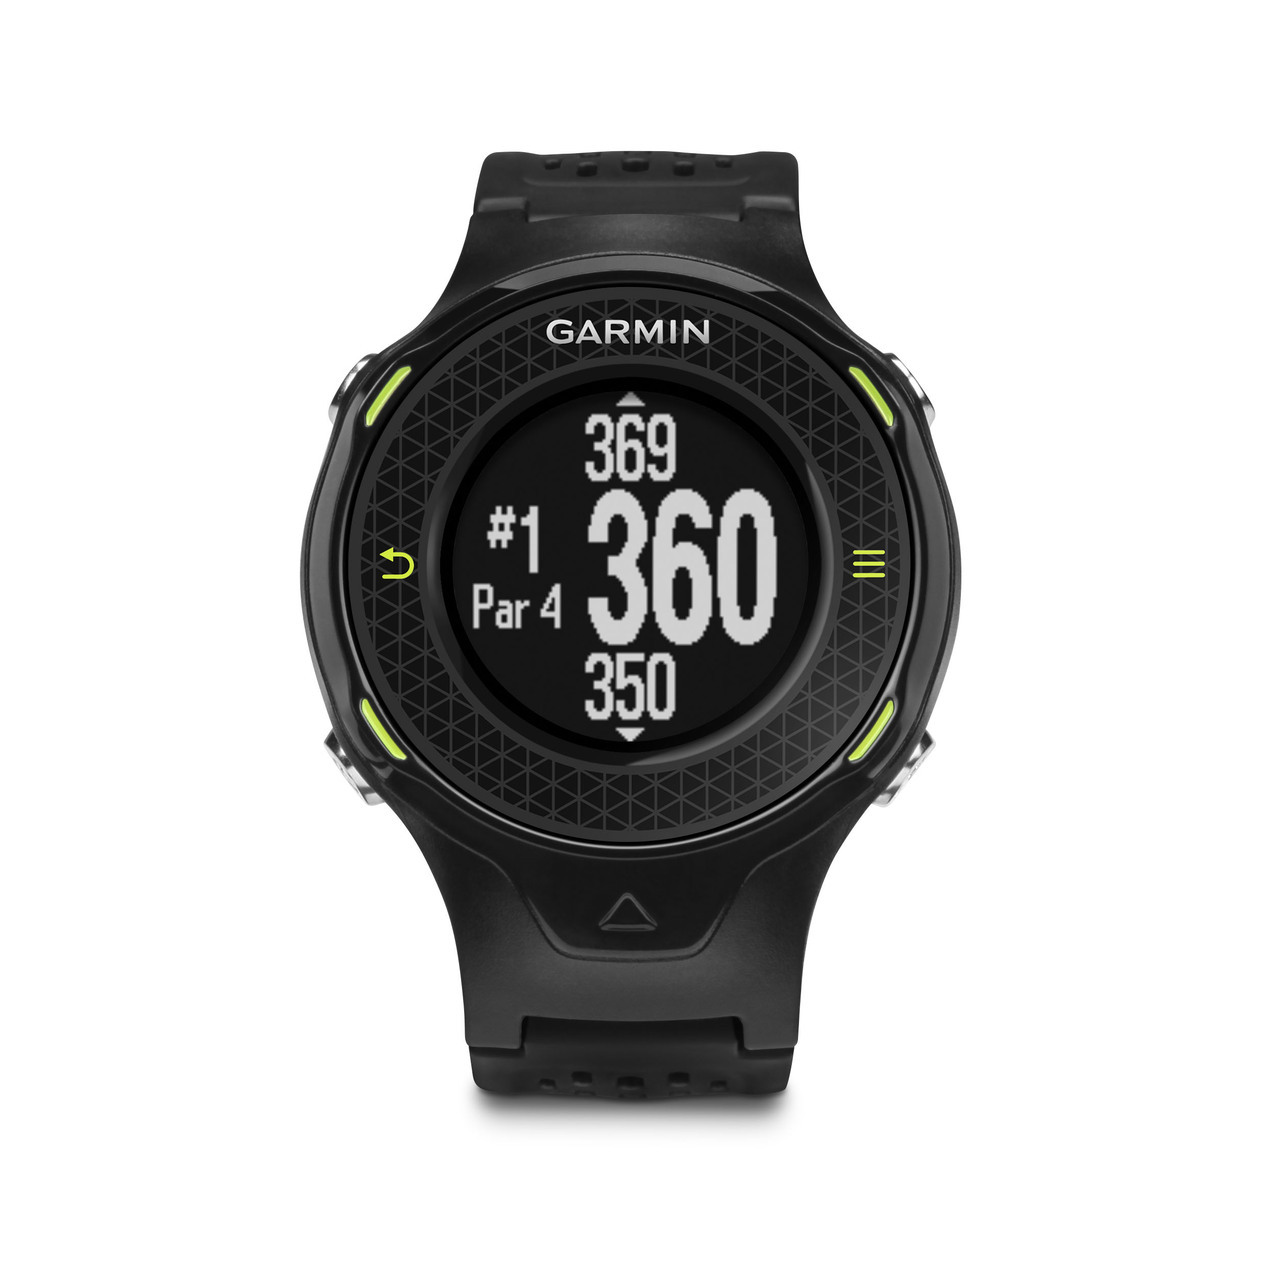 GARMIN APPROACH S4 BLACK WATCH AND GPS SYSTEM